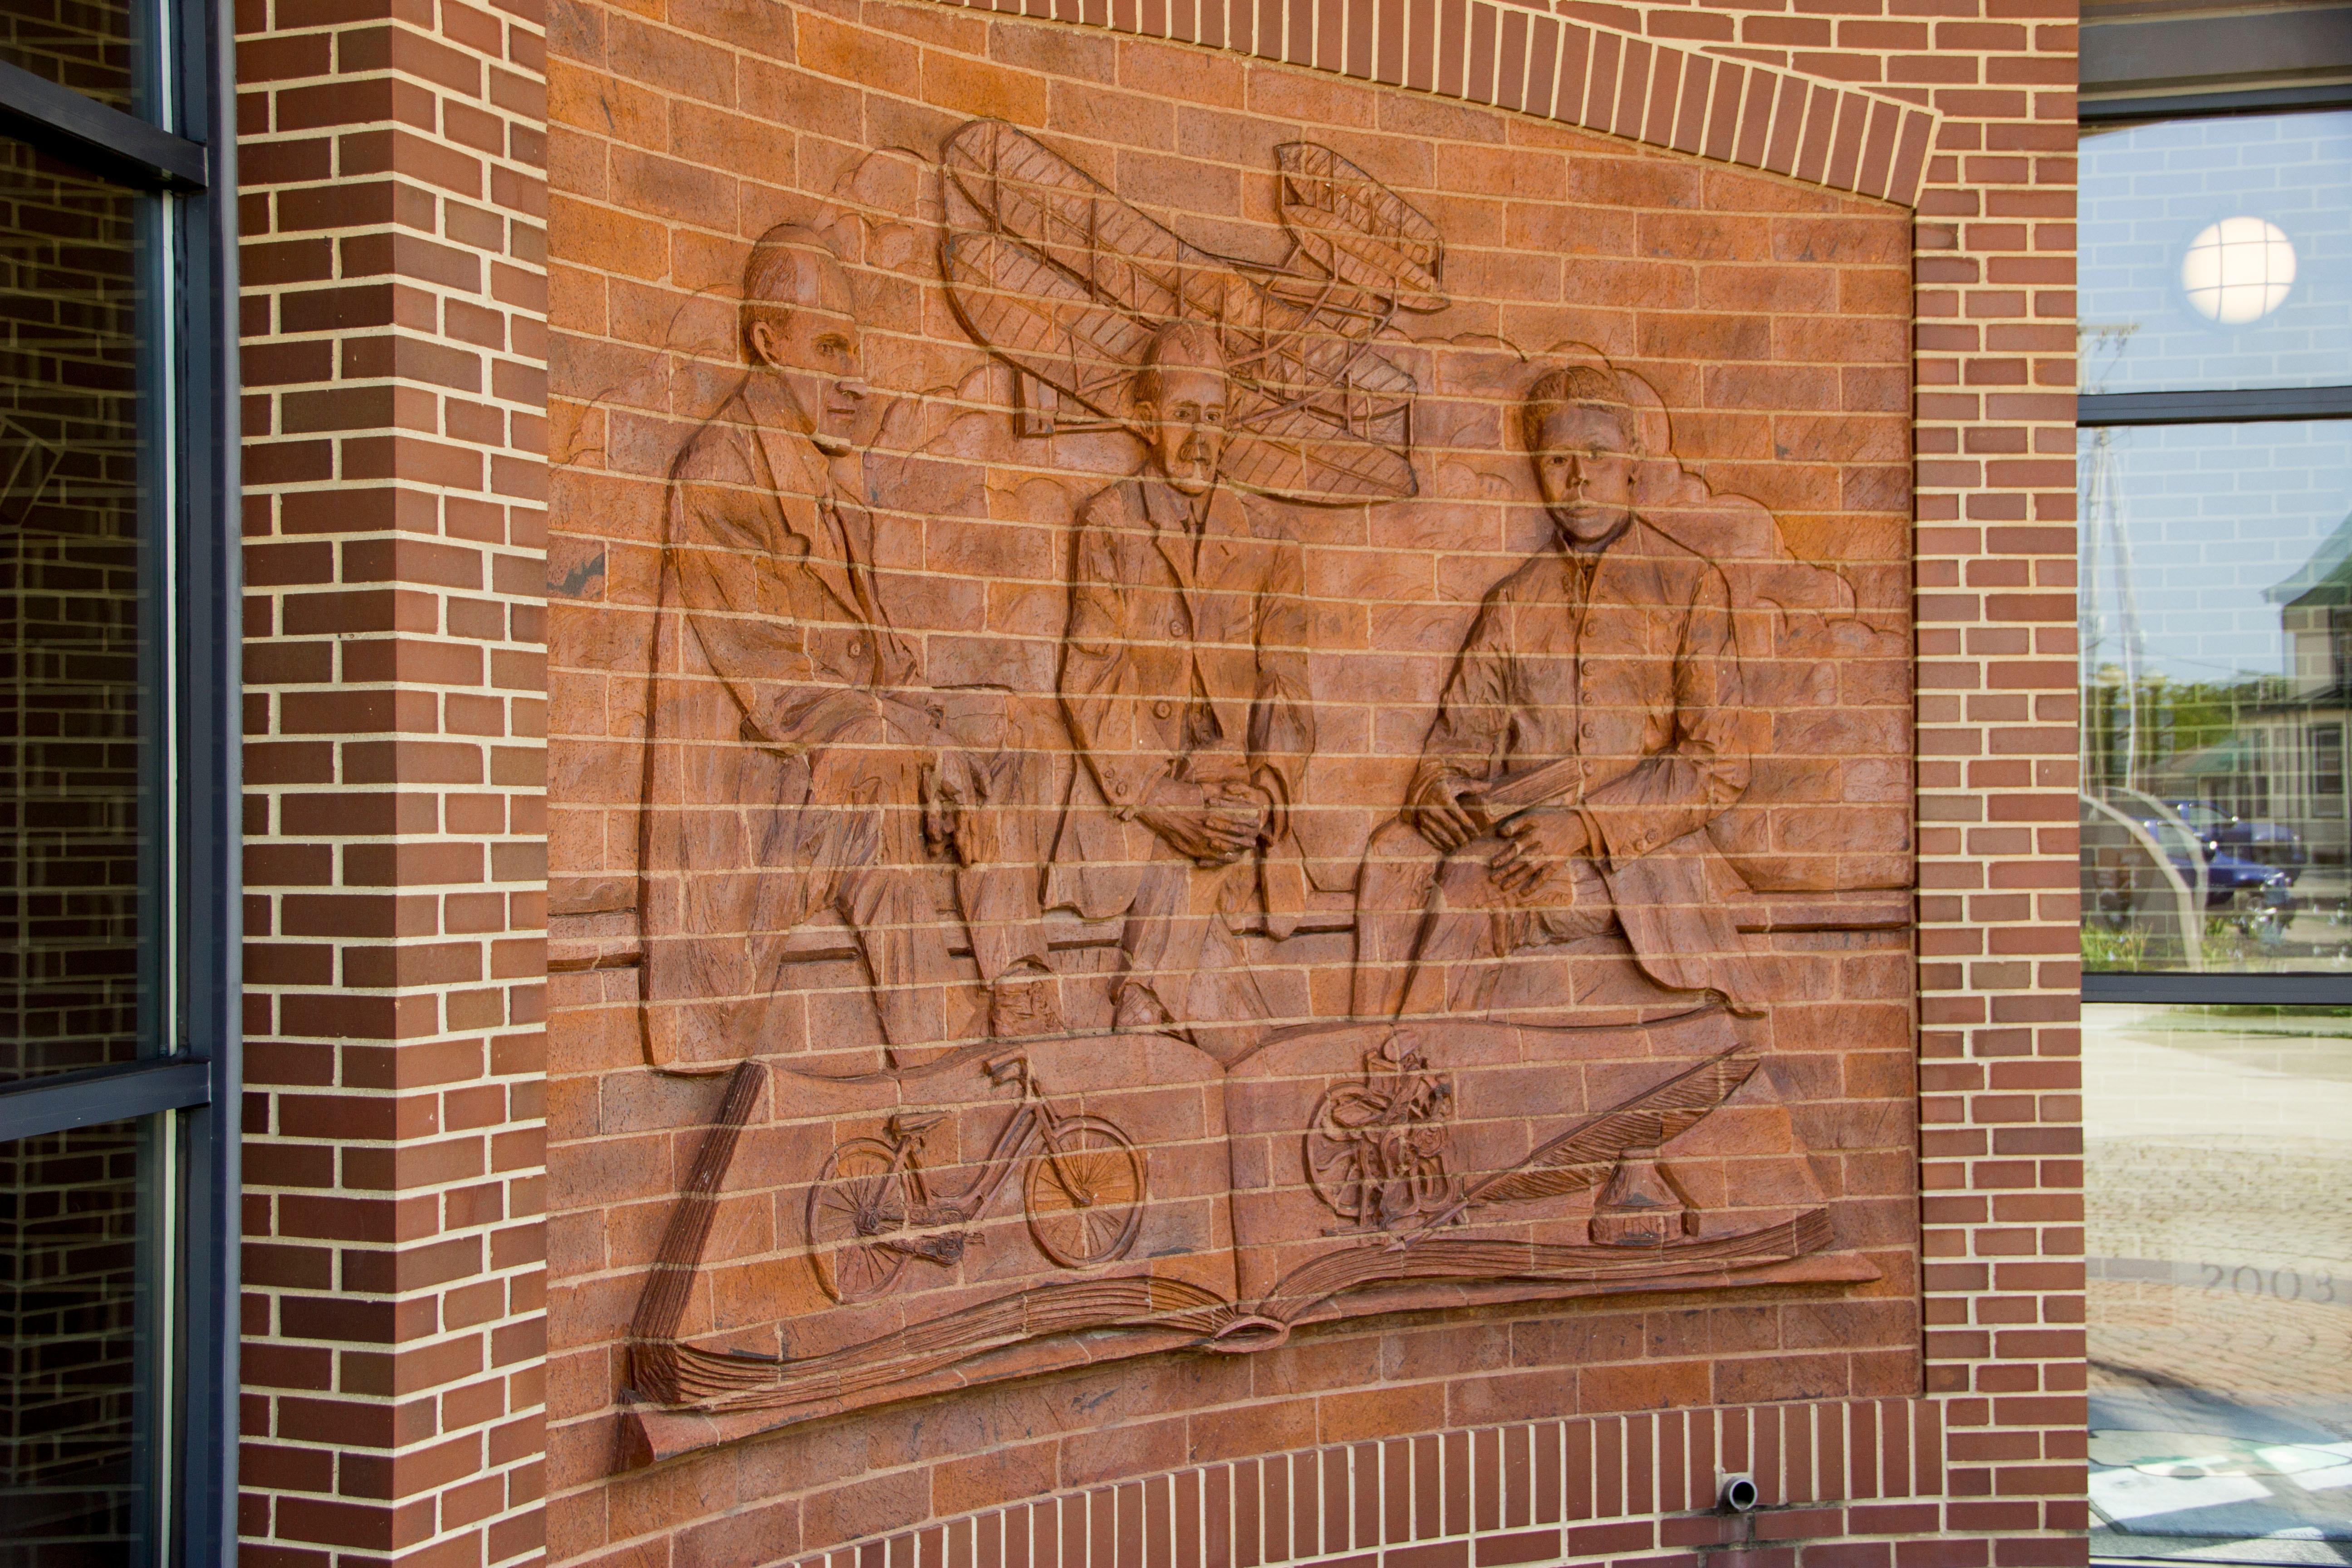 A brick wall with artwork of three men and an airplane etched out of the brick.